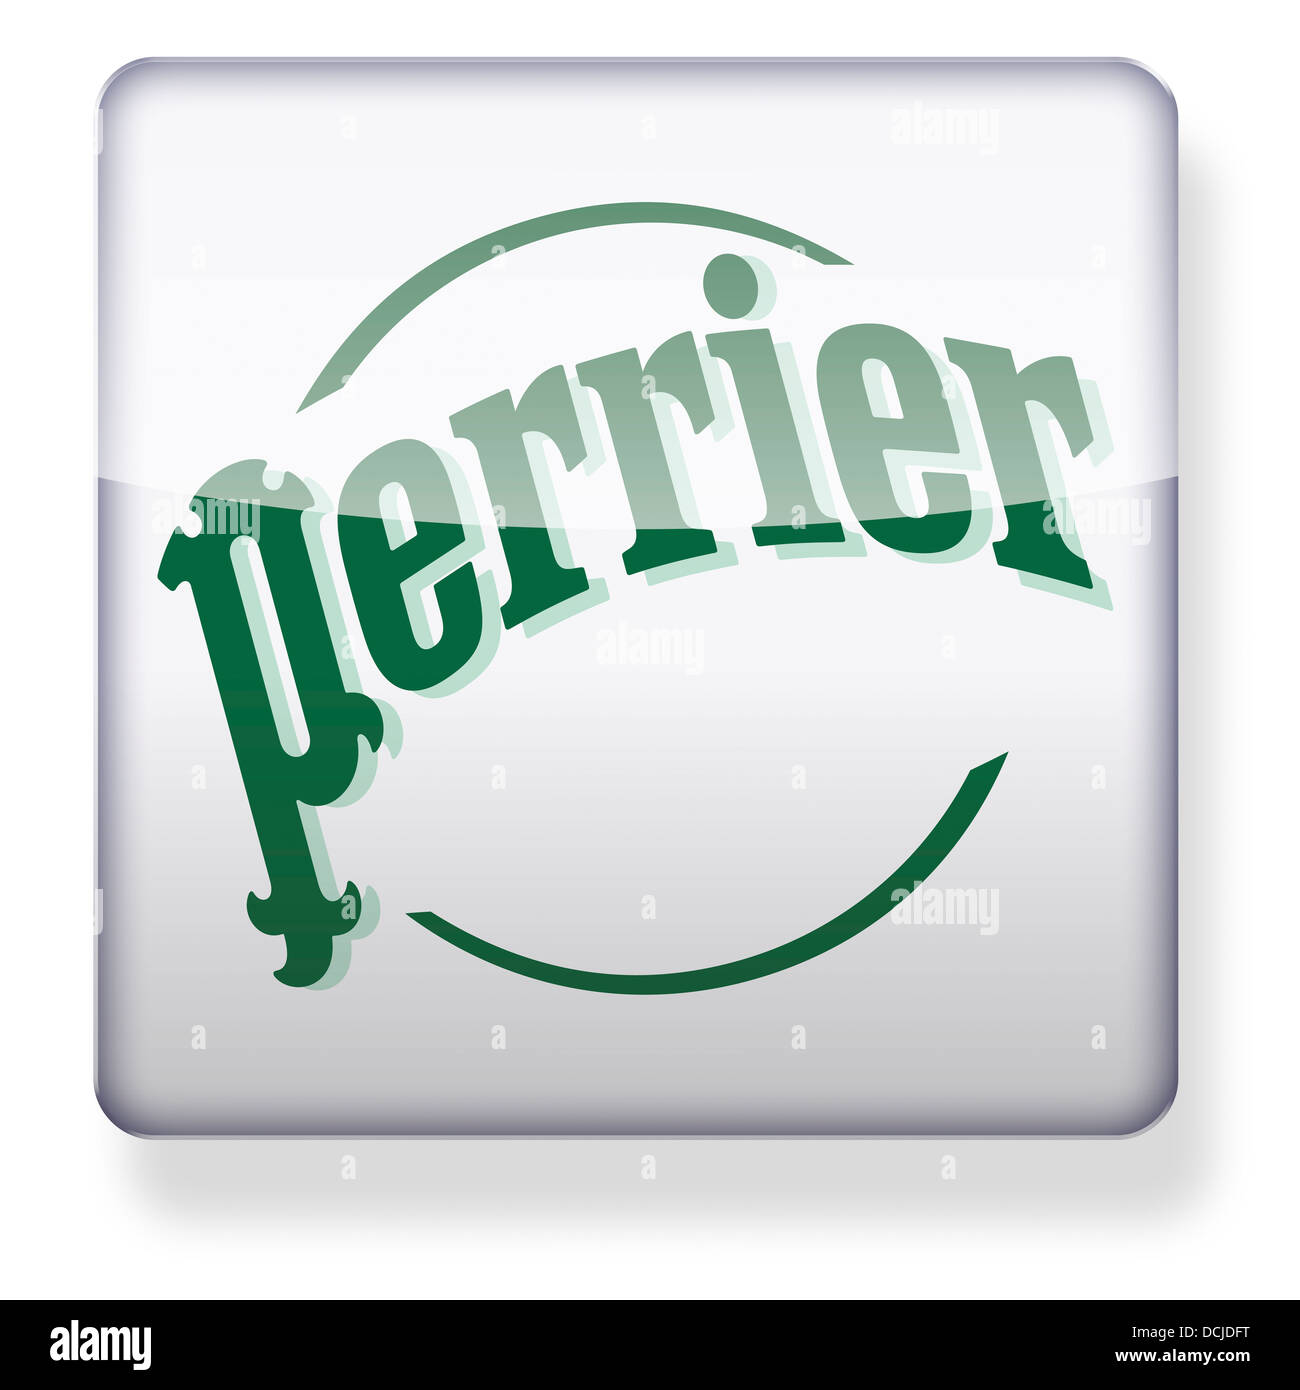 Perrier logo as an app icon. Clipping path included. Stock Photo